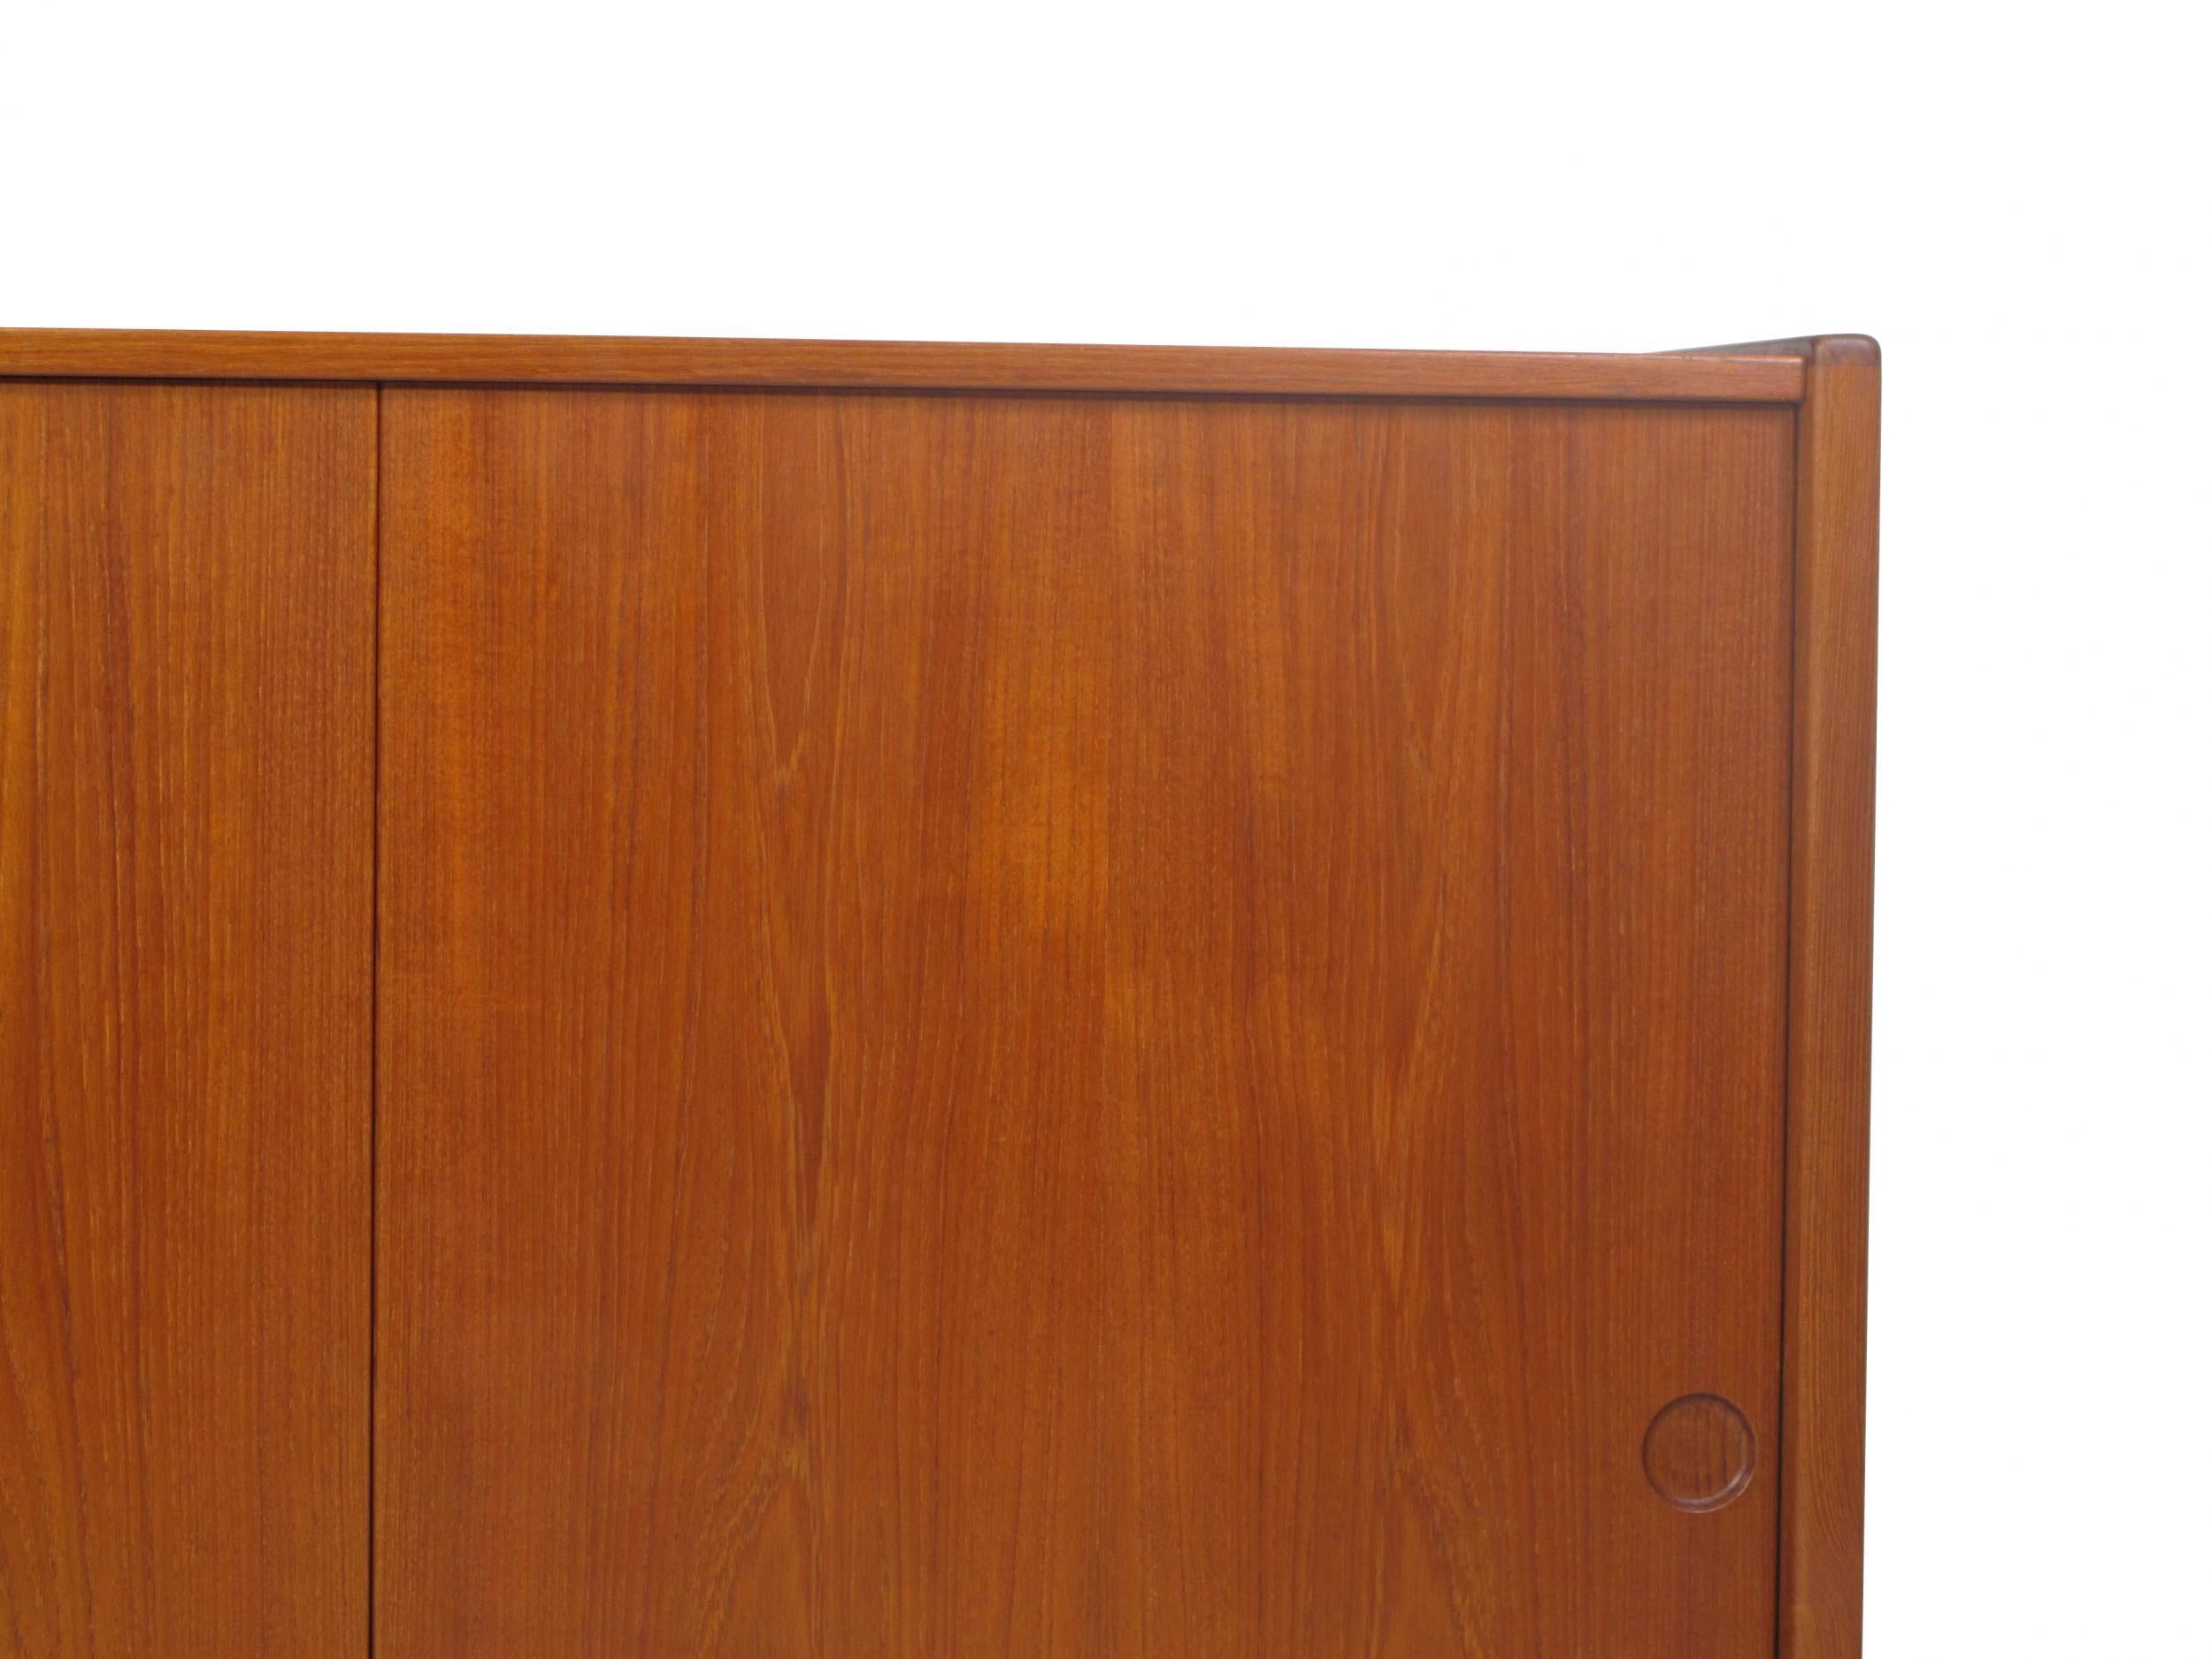 Mid-century Teak credenza designed by Omann Jun with three sliding doors with book-matched grain and recessed pulls, revealing an interior with adjustable shelves, and silverware drawers on the left side. Raised on round tapered legs.